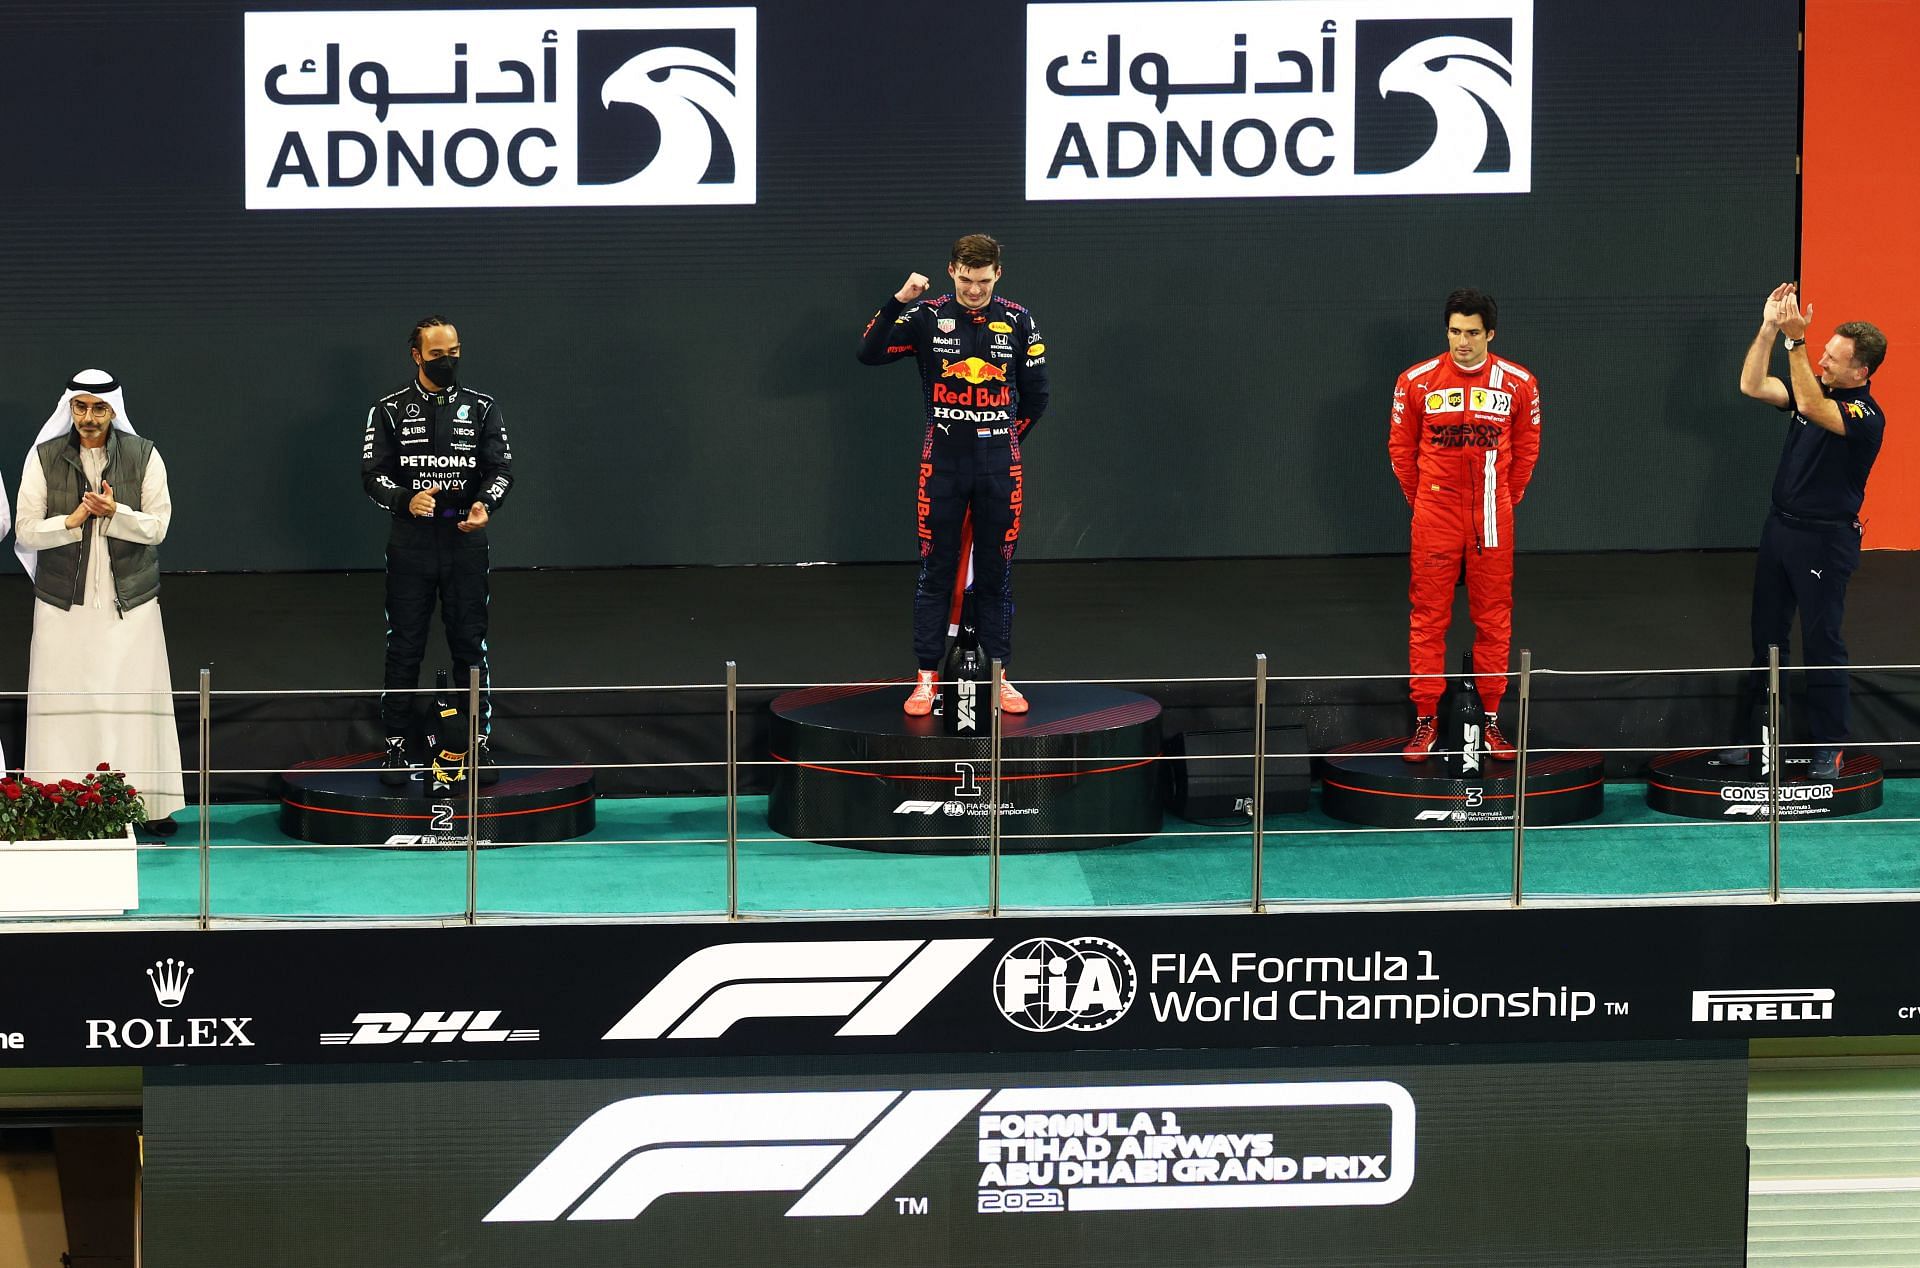 Lewis Hamilton and Carlos Sainz flank Max Verstappen on the 2021 Abu Dhabi GP podium (Photo by Clive Rose/Getty Images)